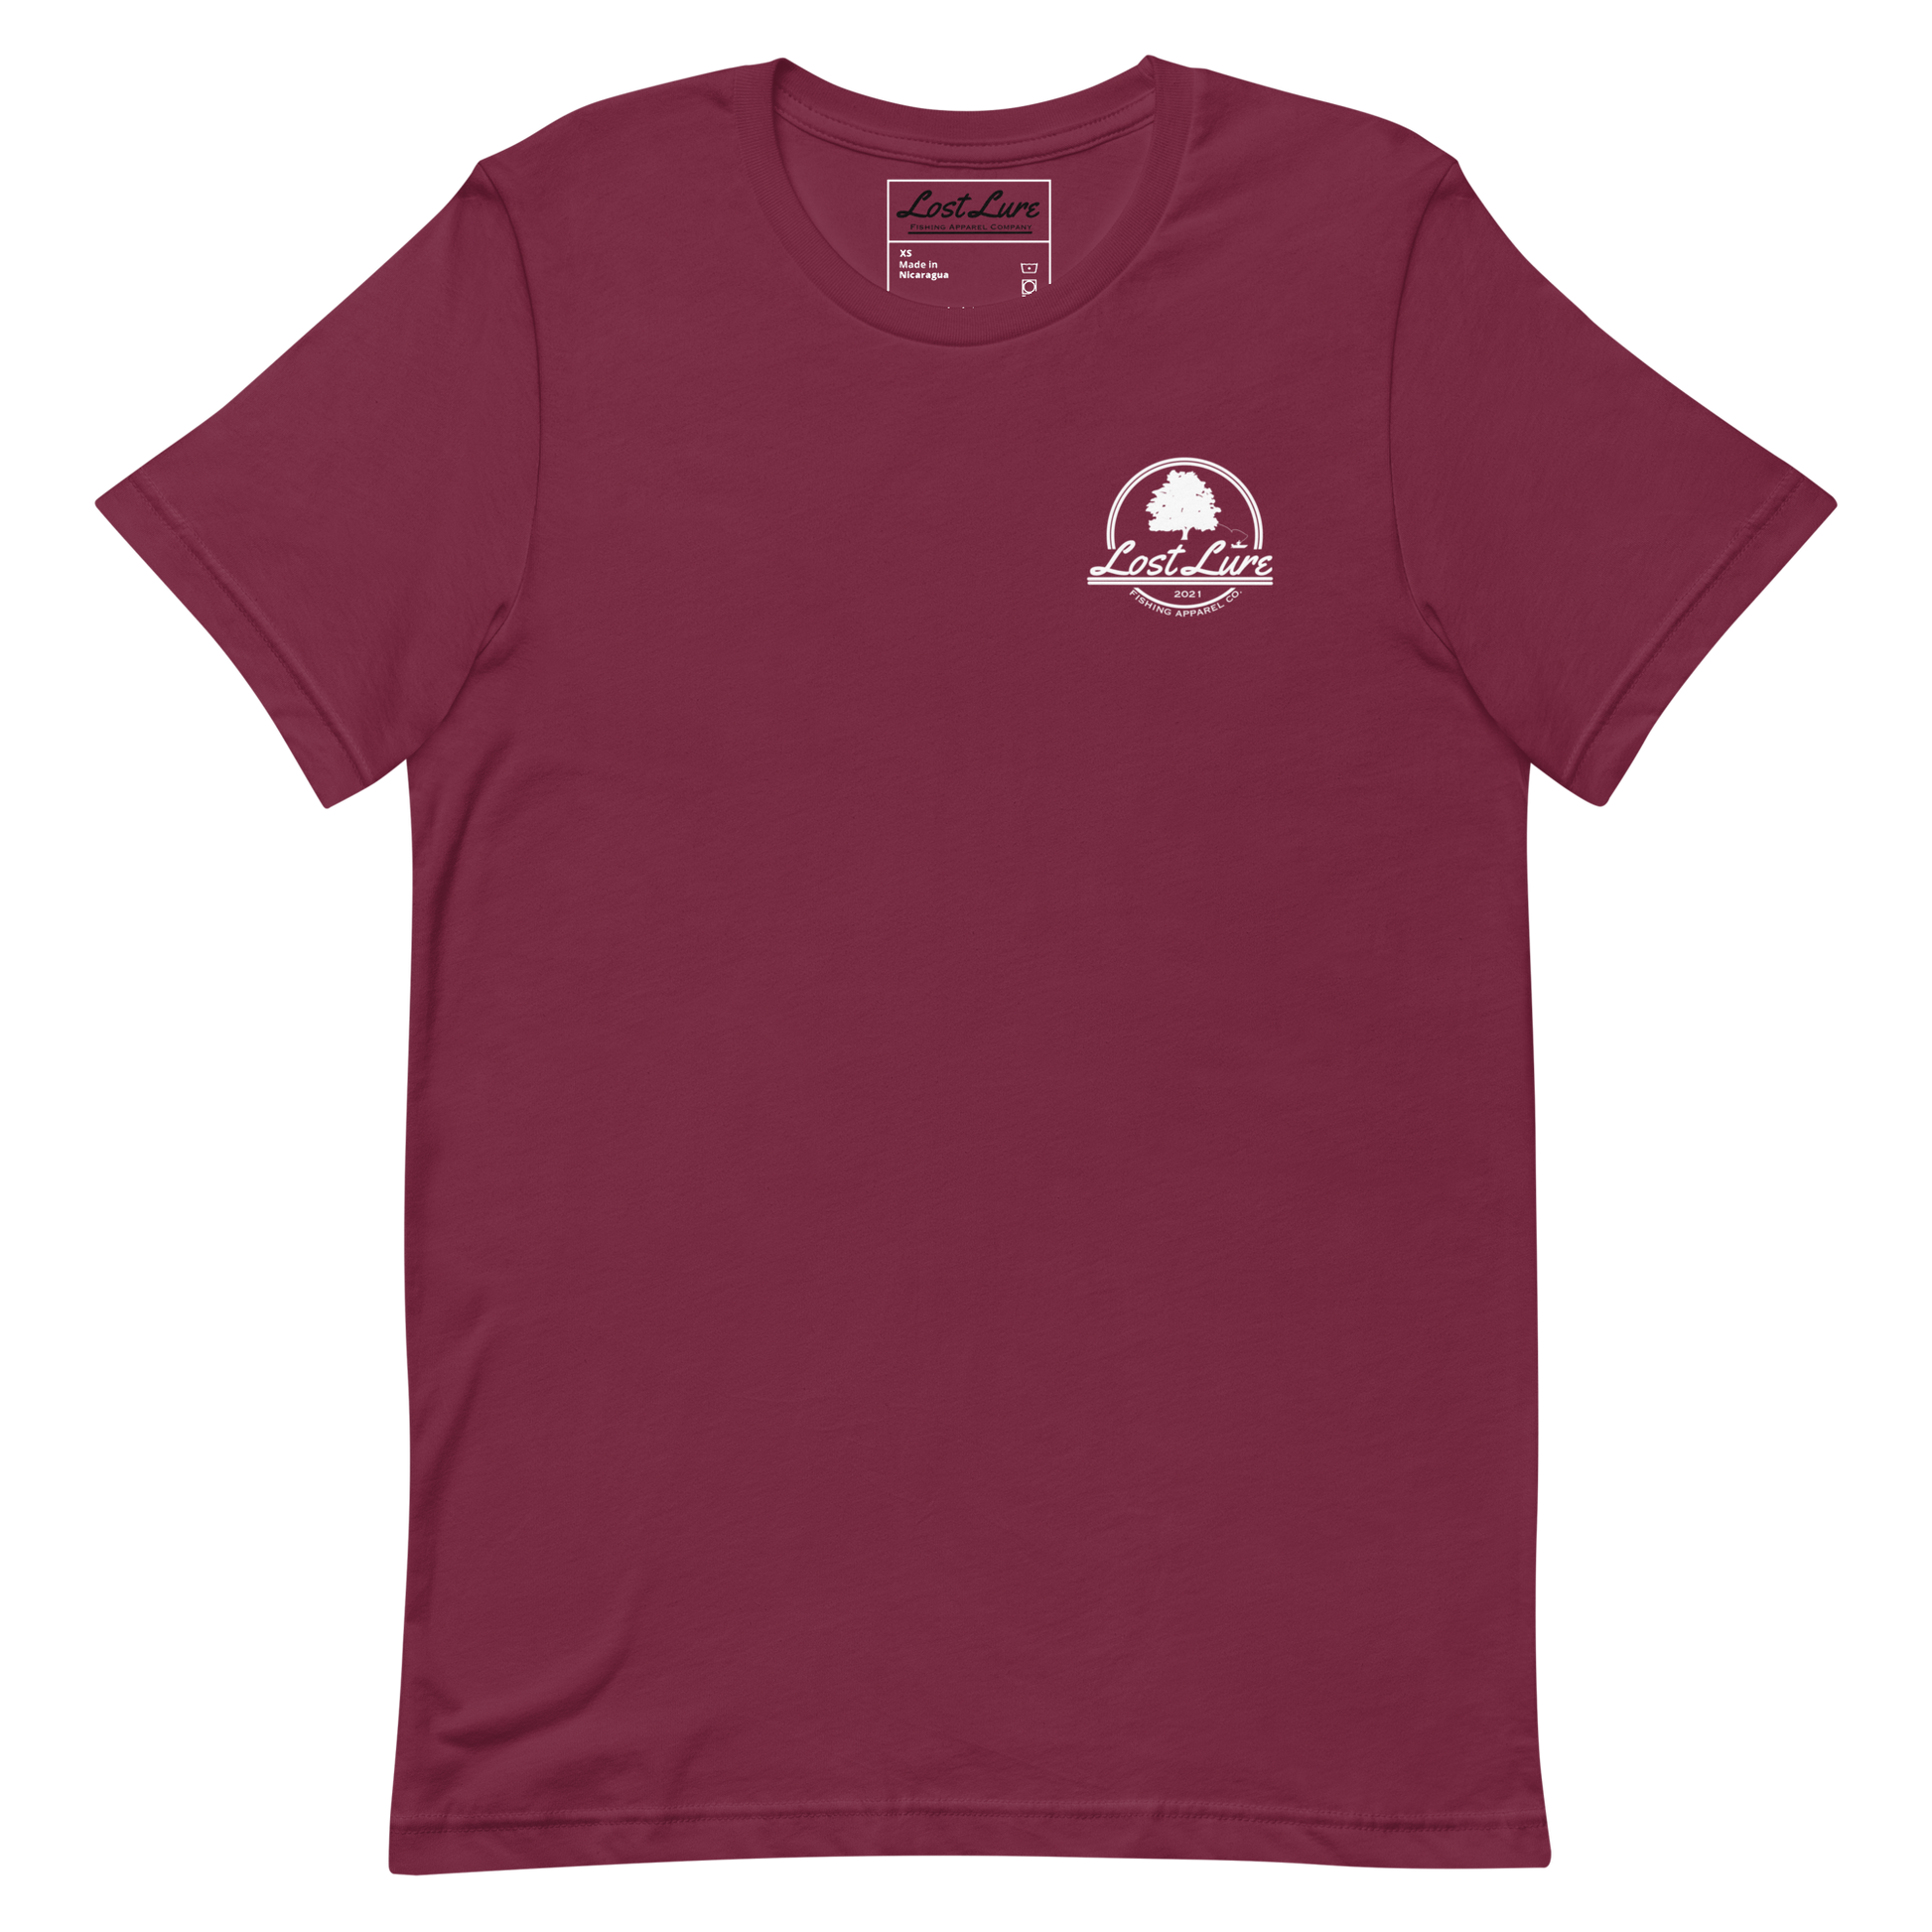 Cutthroat Trout fishing shirt. It’s an American traditional style design with a cutthroat trout and a dagger. The shirt reads Cutthroat trout, est. 2021, lost lure fishing apparel company. The front of the shirt has the lost lure logo. Maroon fishing shirt, front side